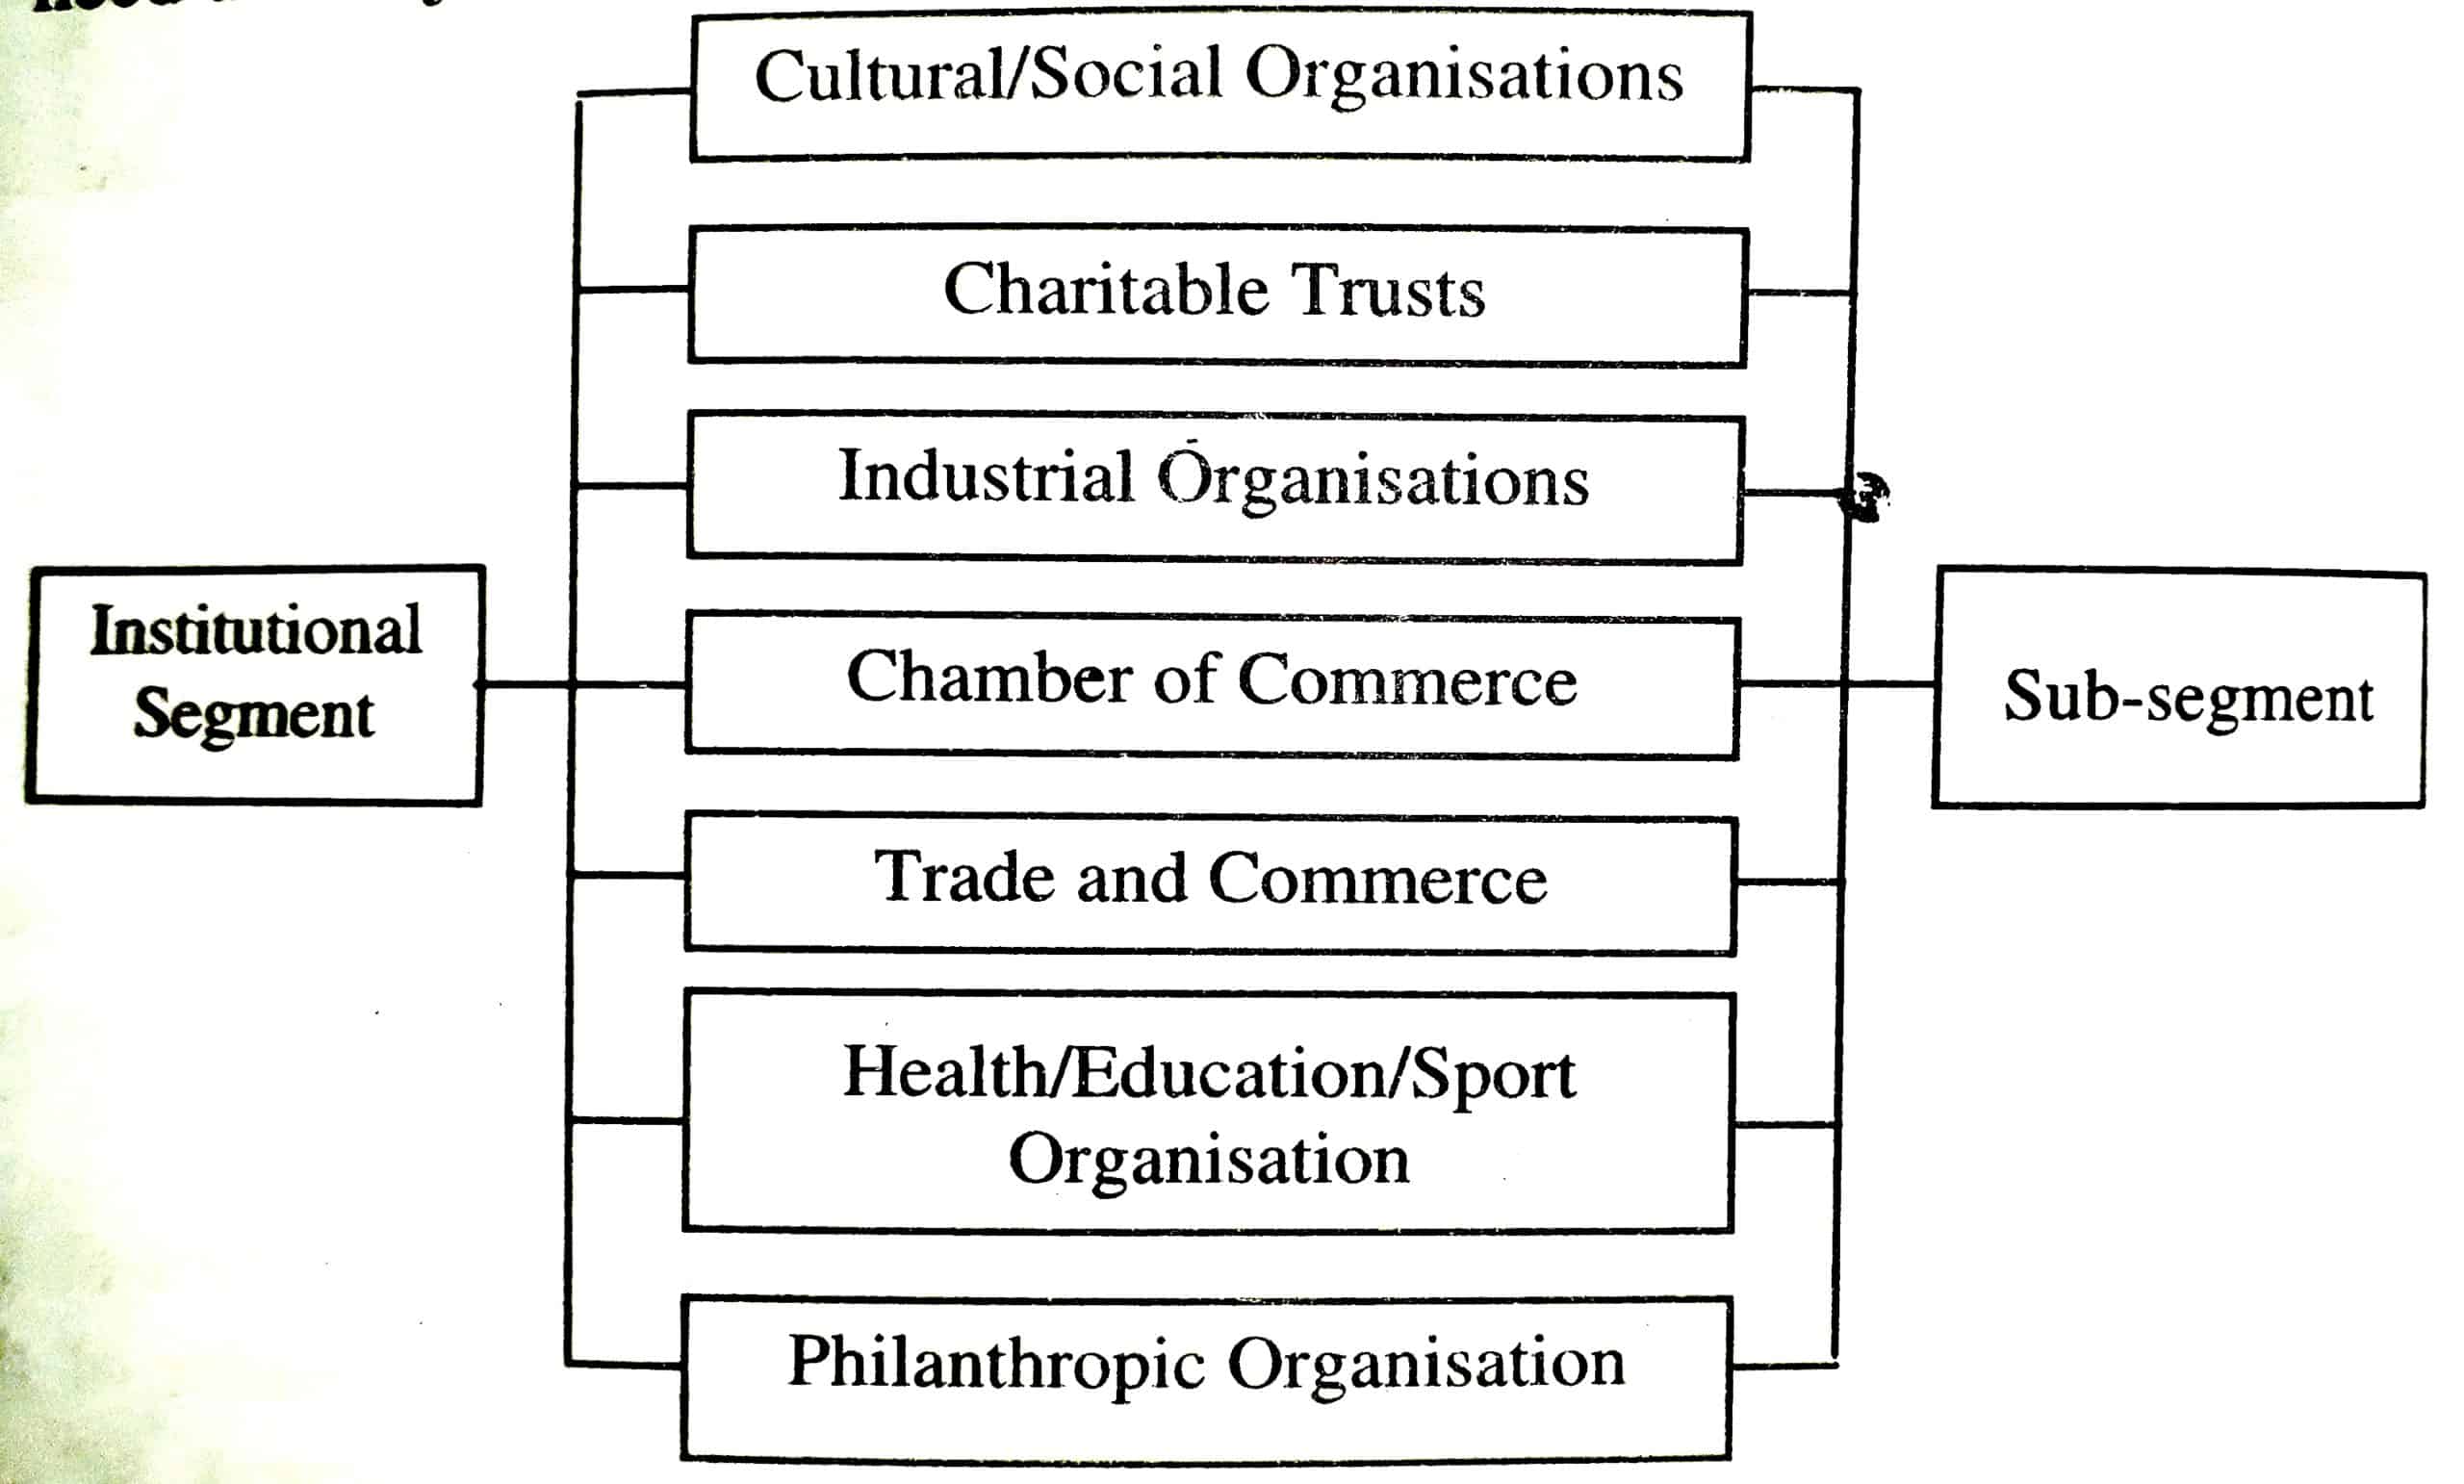 Institutional Sector